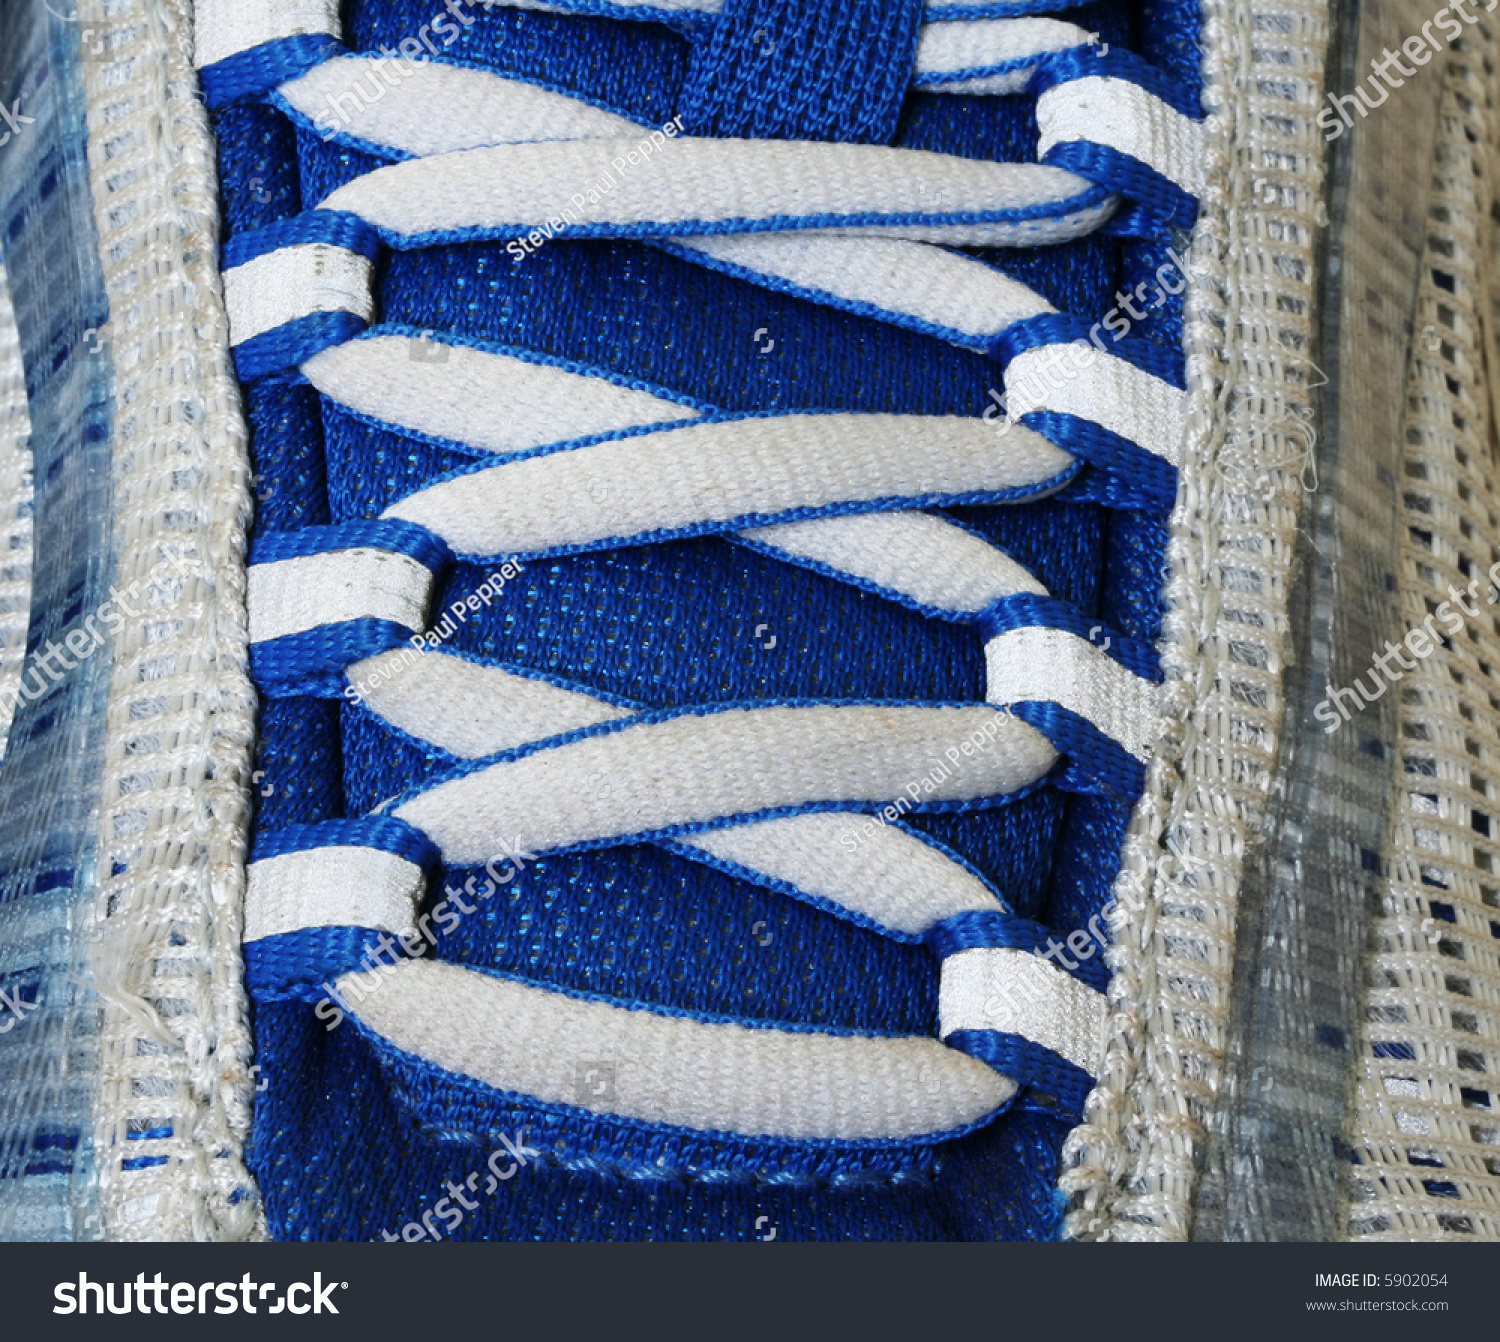 blue and white laces